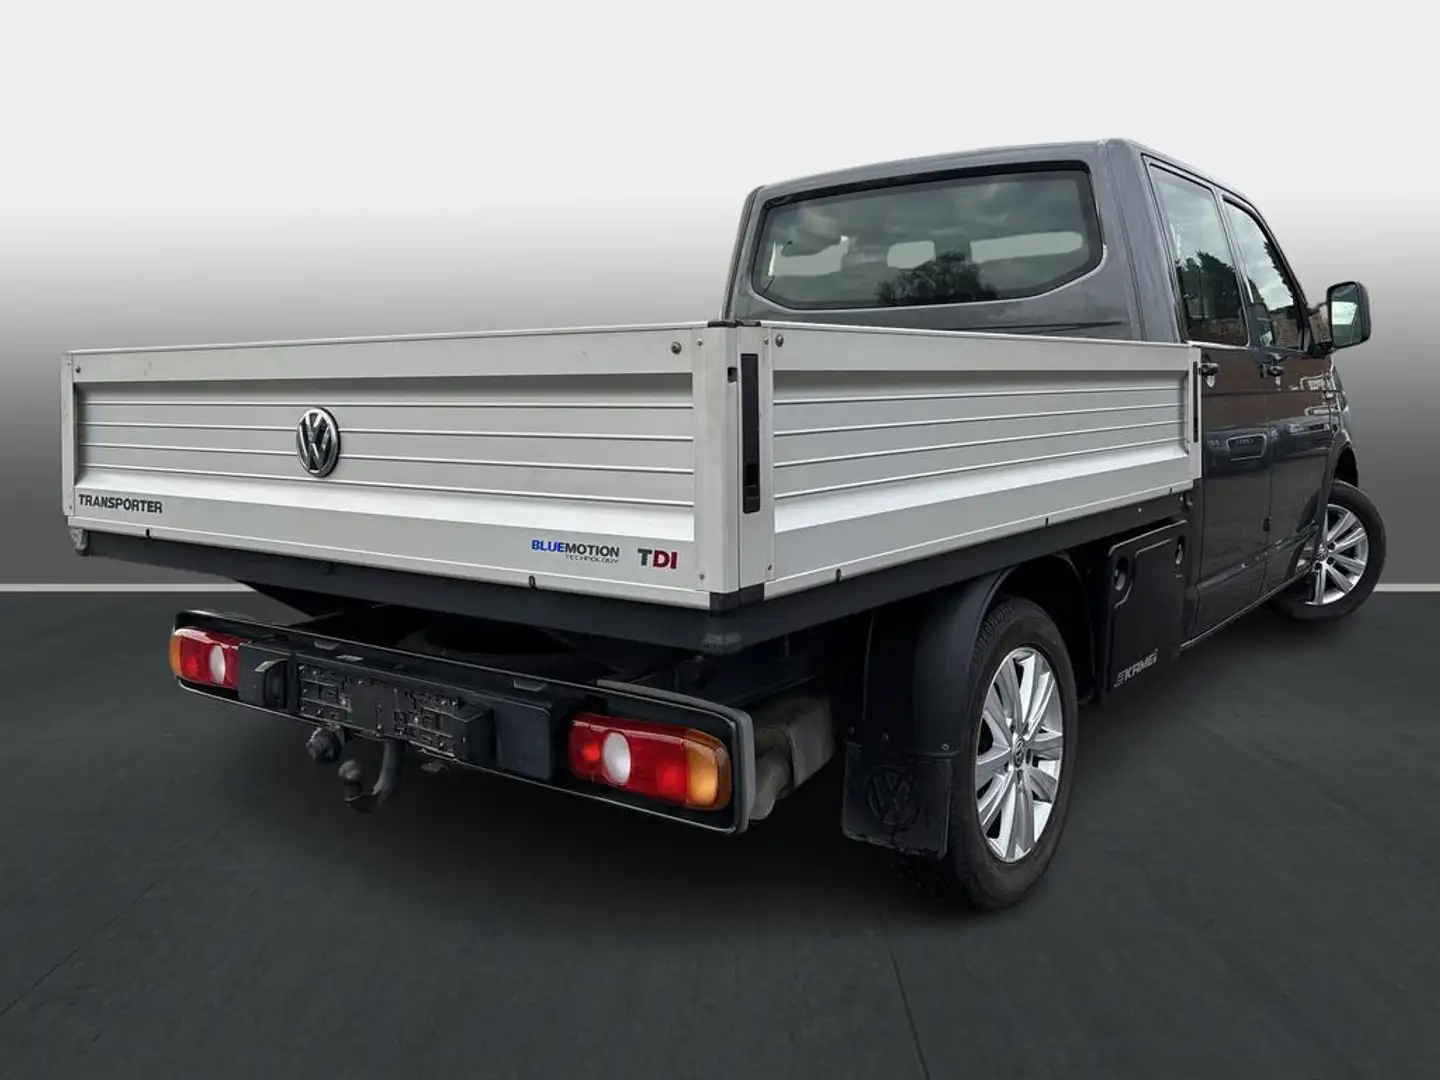 Volkswagen T6 Transporter Transporter chassis double cab, wheelbase: 3 400 m Szary - 2